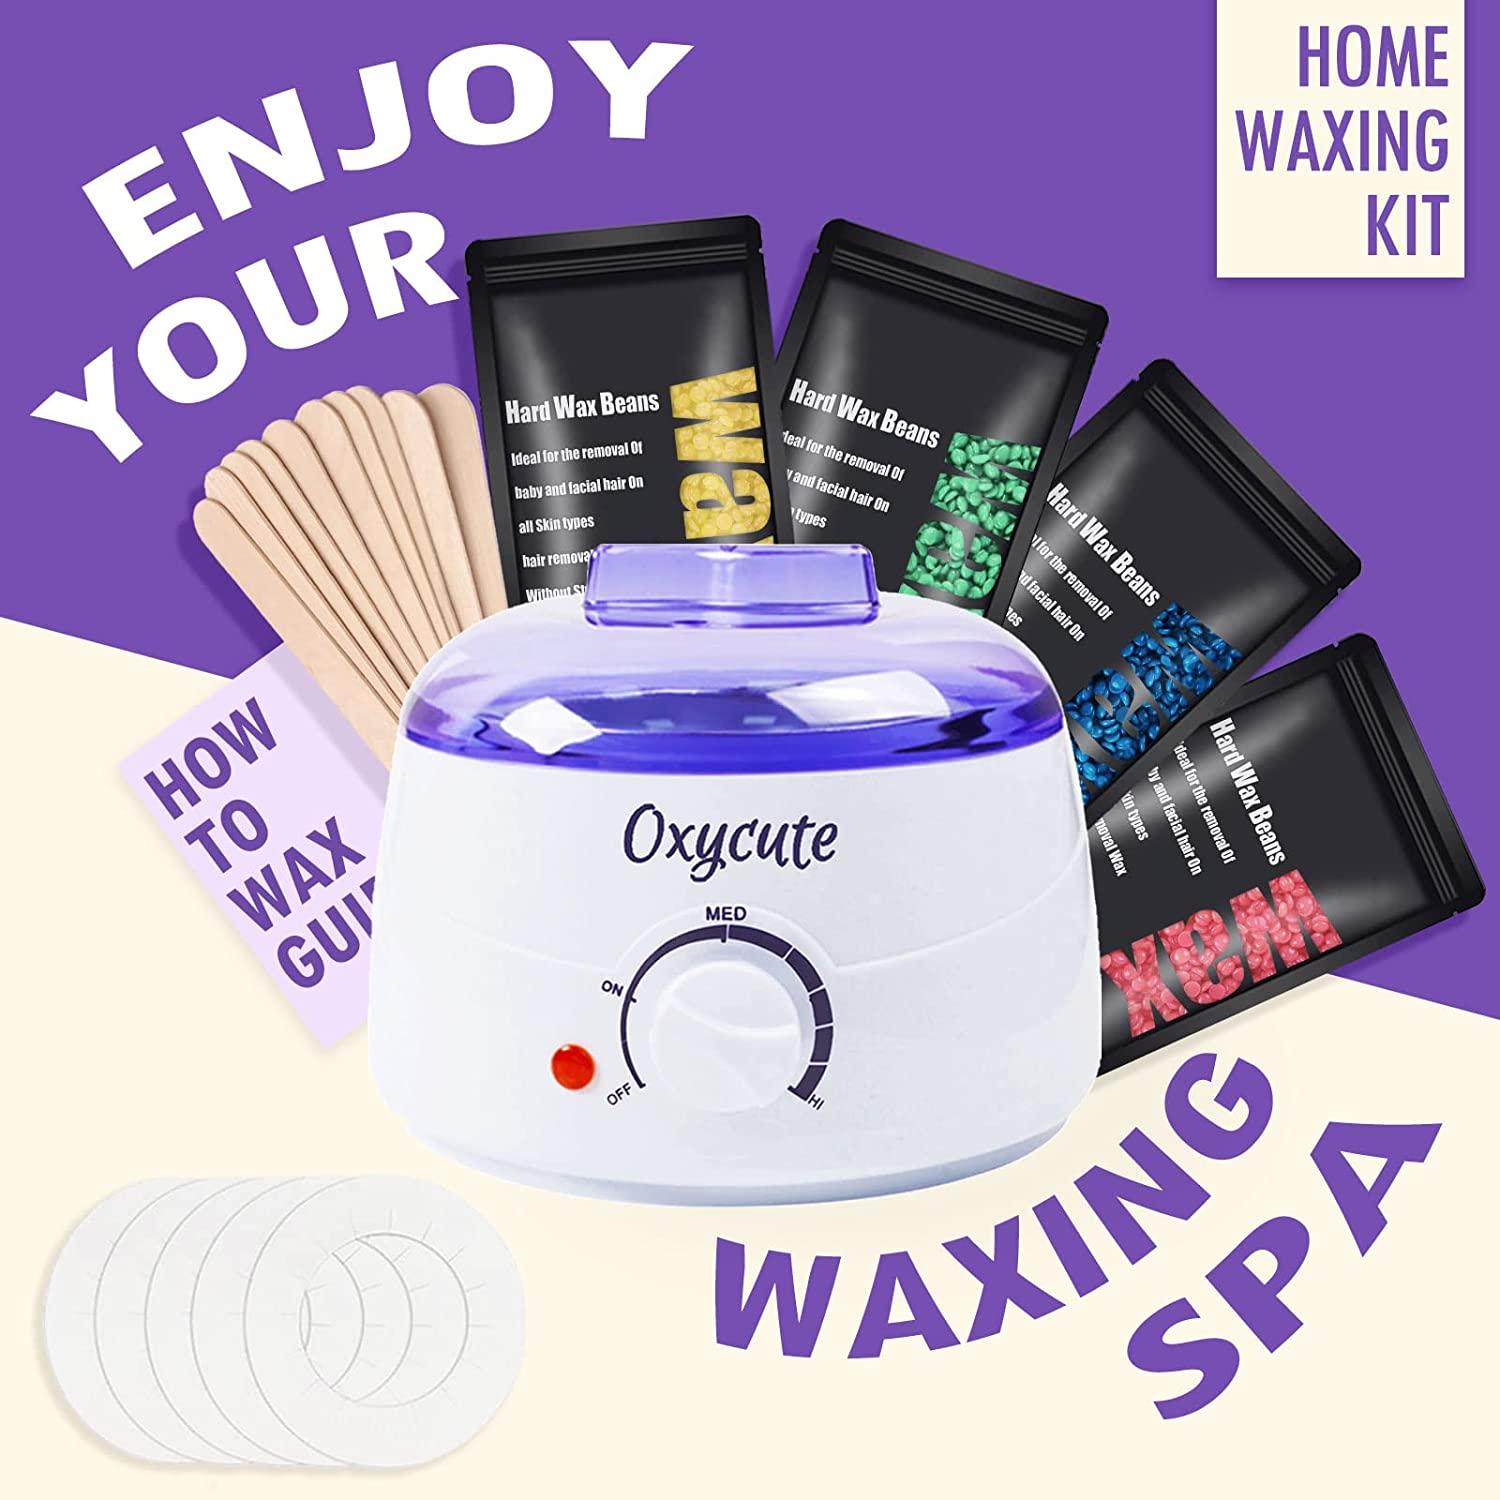 Waxing Kit for Women Men, Wax Warmer Hair Removal Kit with 4 Packs